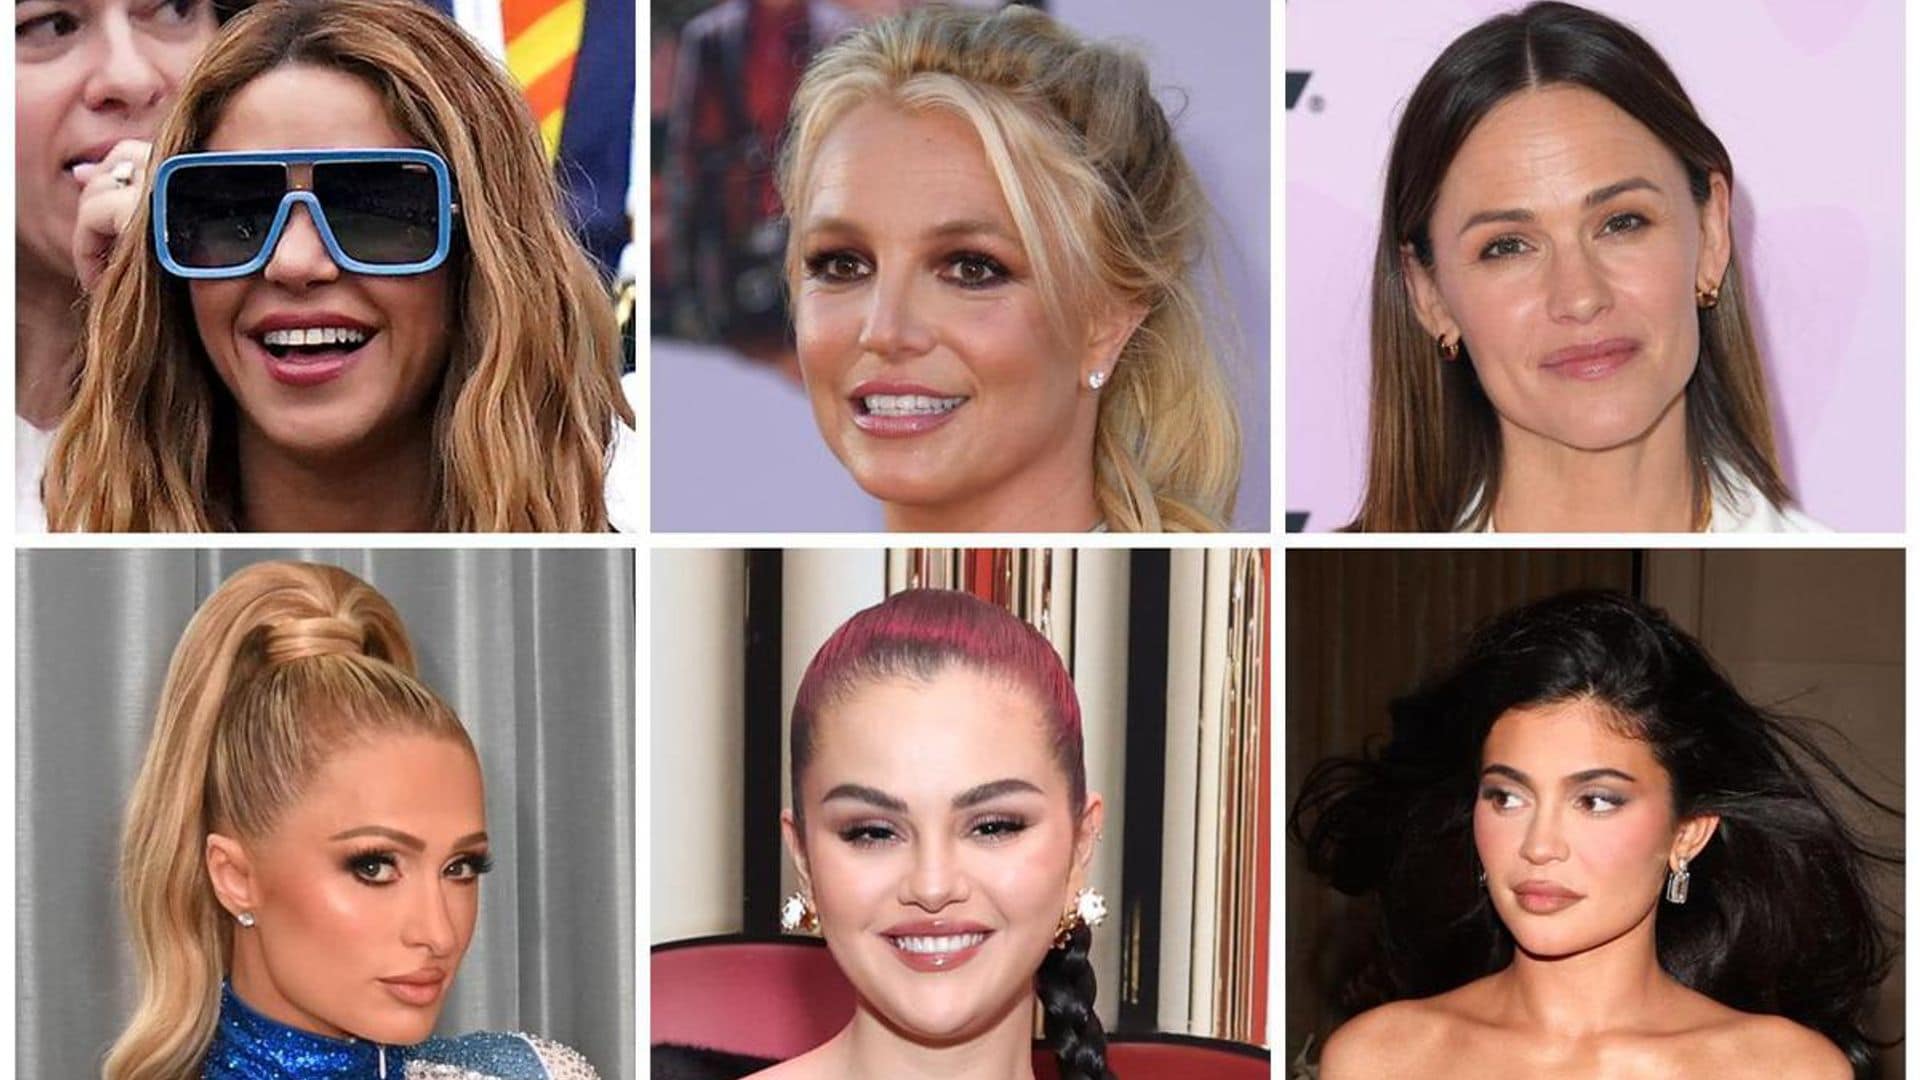 Watch the 10 Best Celebrity TikToks of the Week: Britney Spears, Shakira, Kylie Jenner, and more